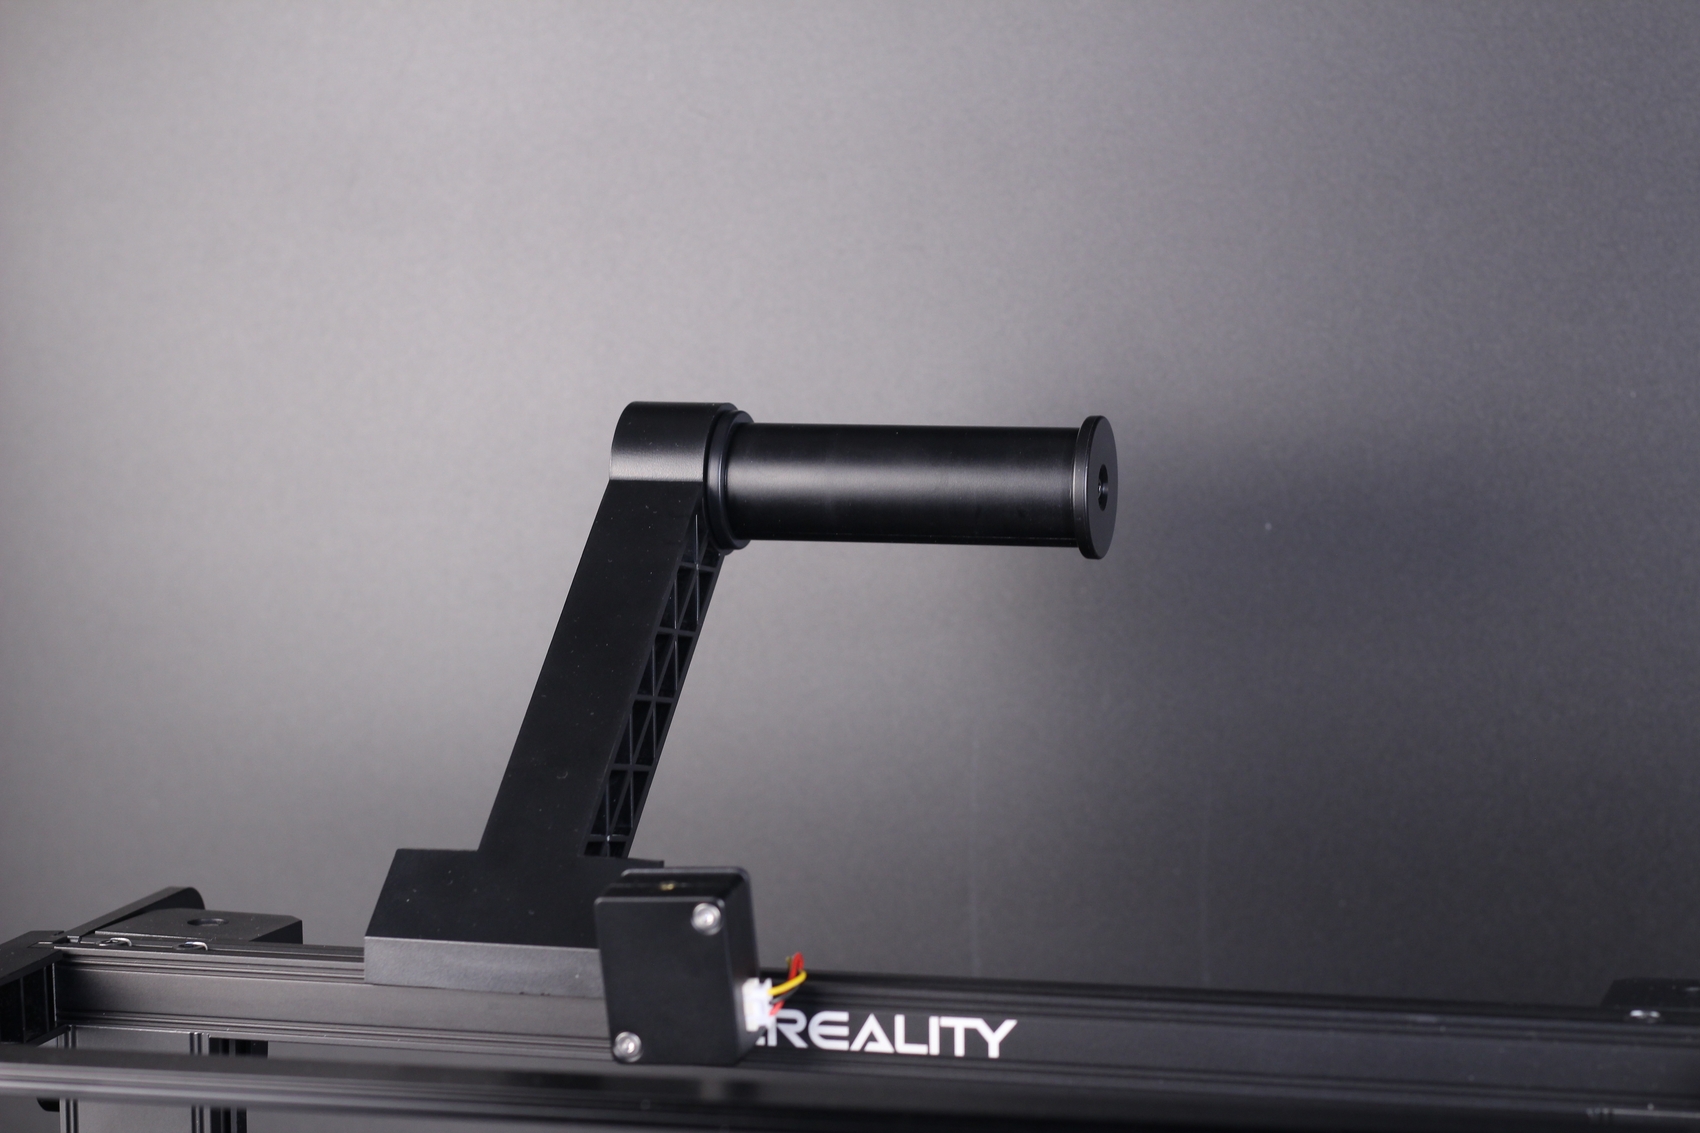 CR 10 Smart Pro Review Upgraded Spool Holder | Creality CR-10 Smart Pro Review: Capable but Pricey